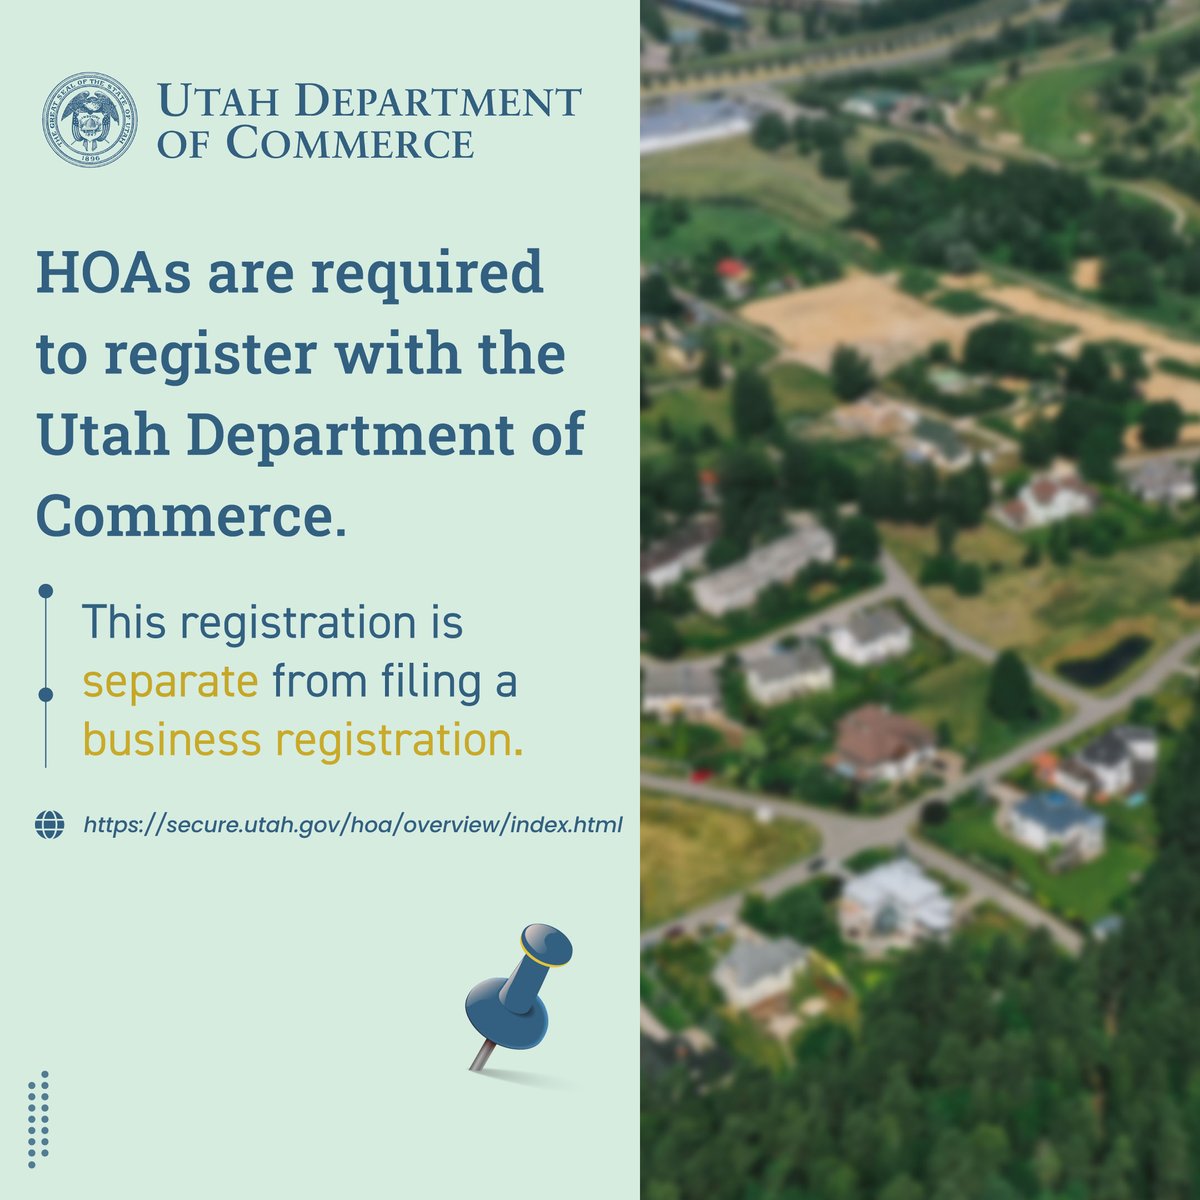 Did you know all HOAs are required to register with the Utah Department of Commerce? This is separate from filing a business registration with our Division of Corporations and Commercial Code. Here's what you need to know about registering an HOA: secure.utah.gov/hoa/overview/i…